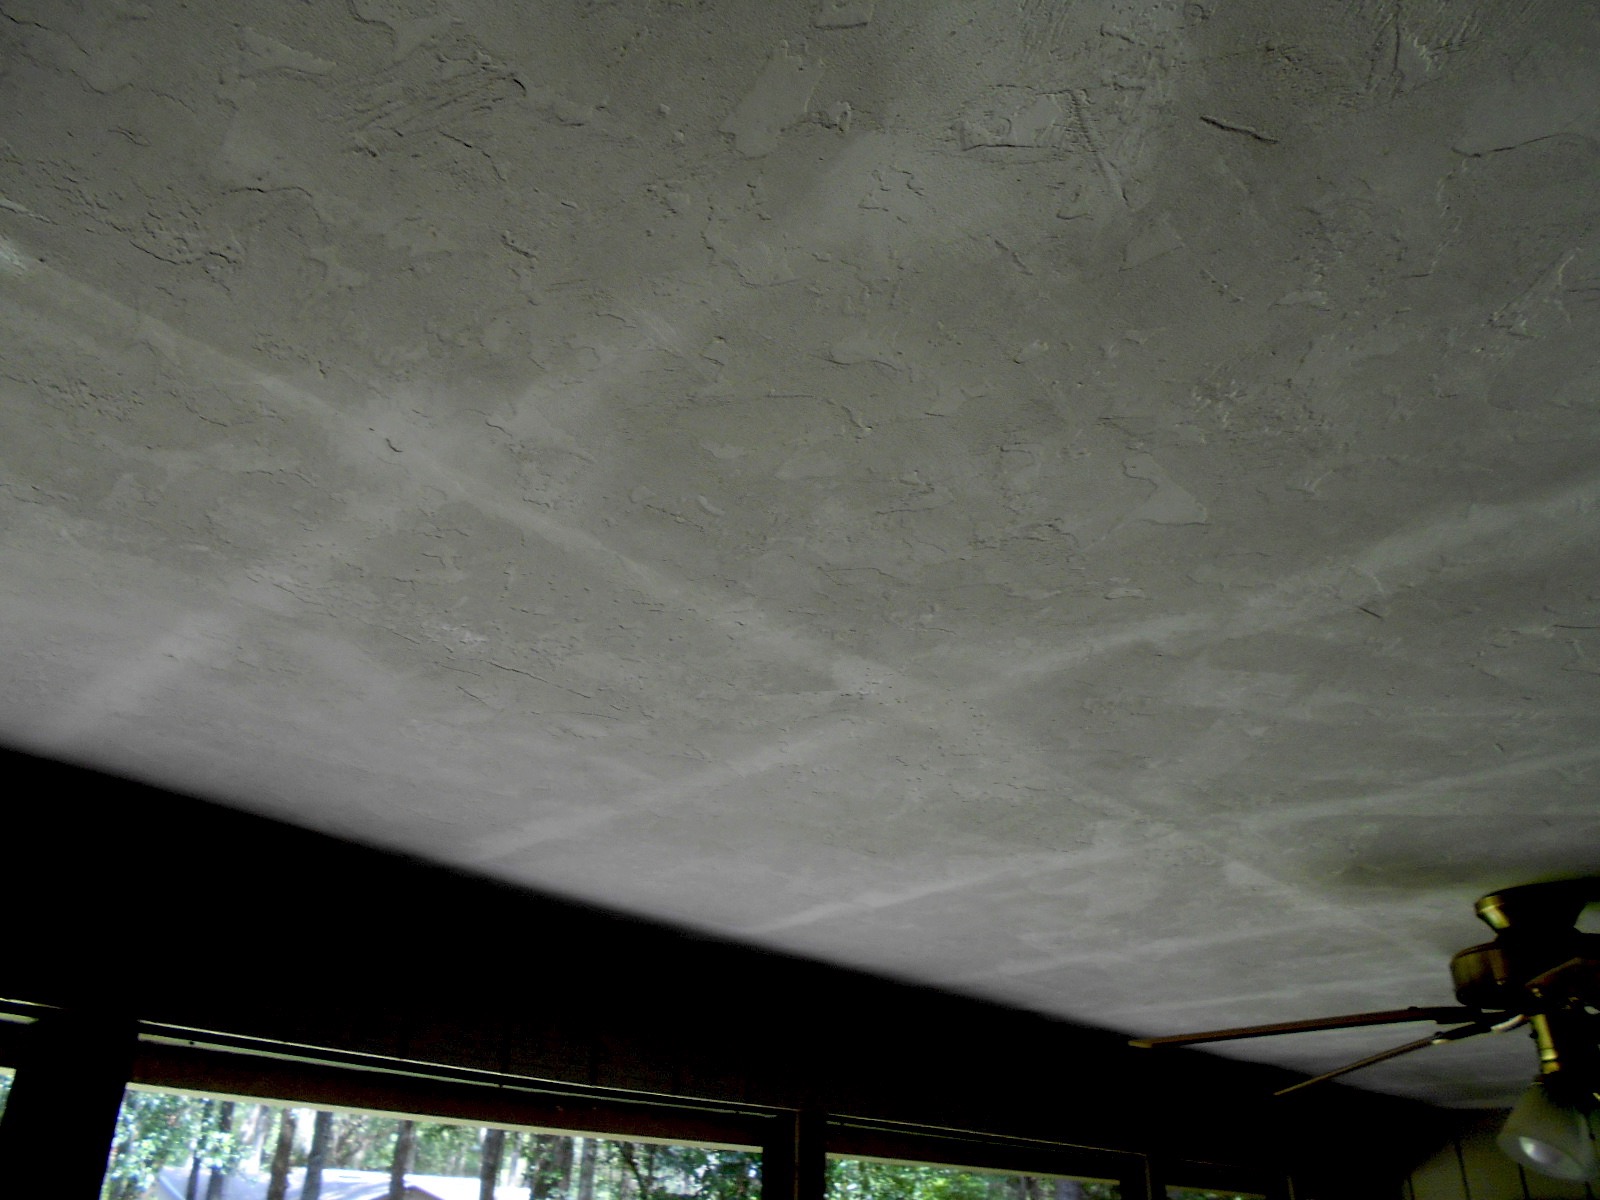 What Causes Dark Or Light Lines On Ceilings And Walls